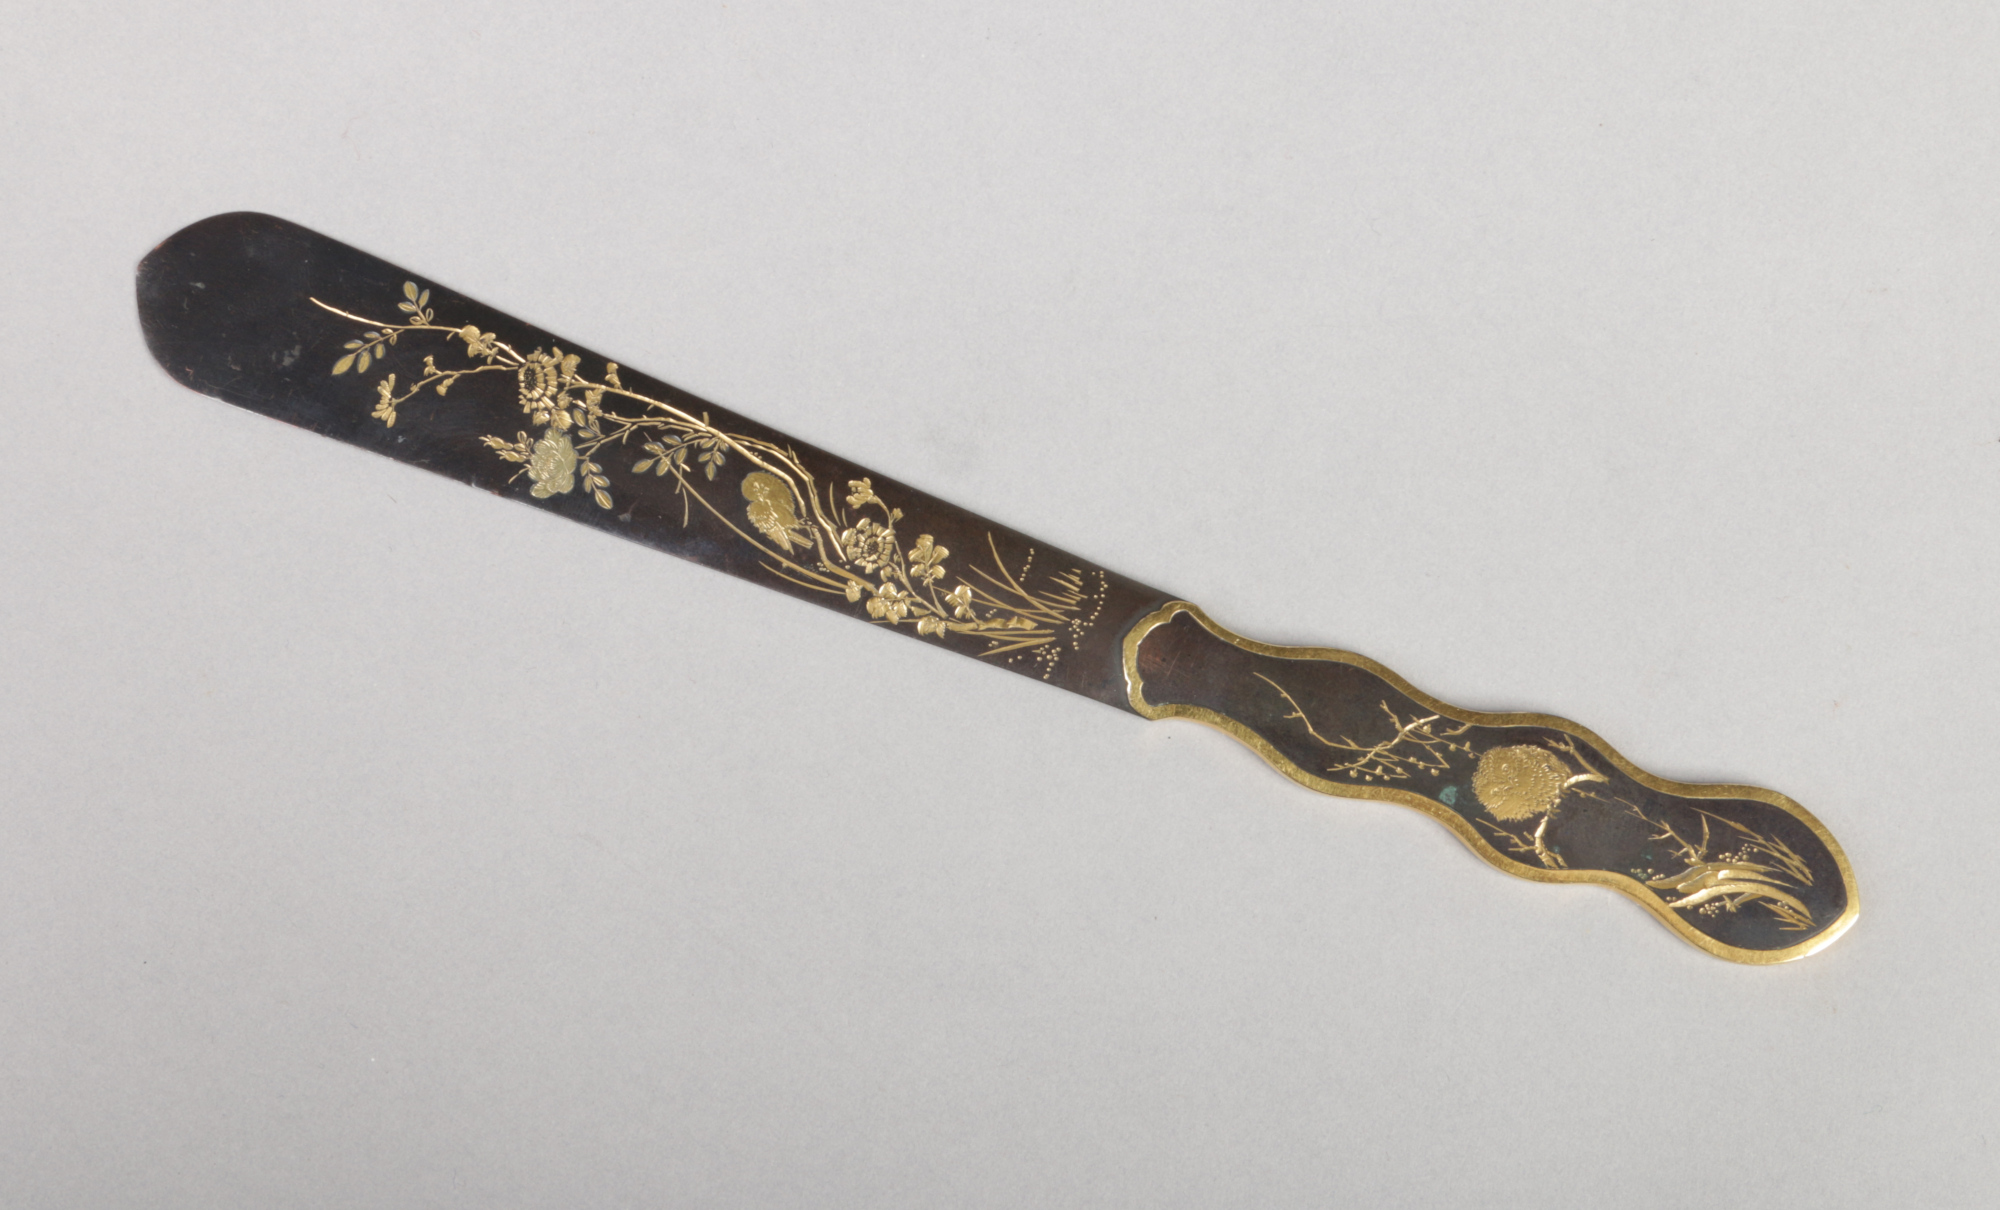 A Japanese bronze paper knife. Engraved with birds and flowers and having gilt embellishments, 22.